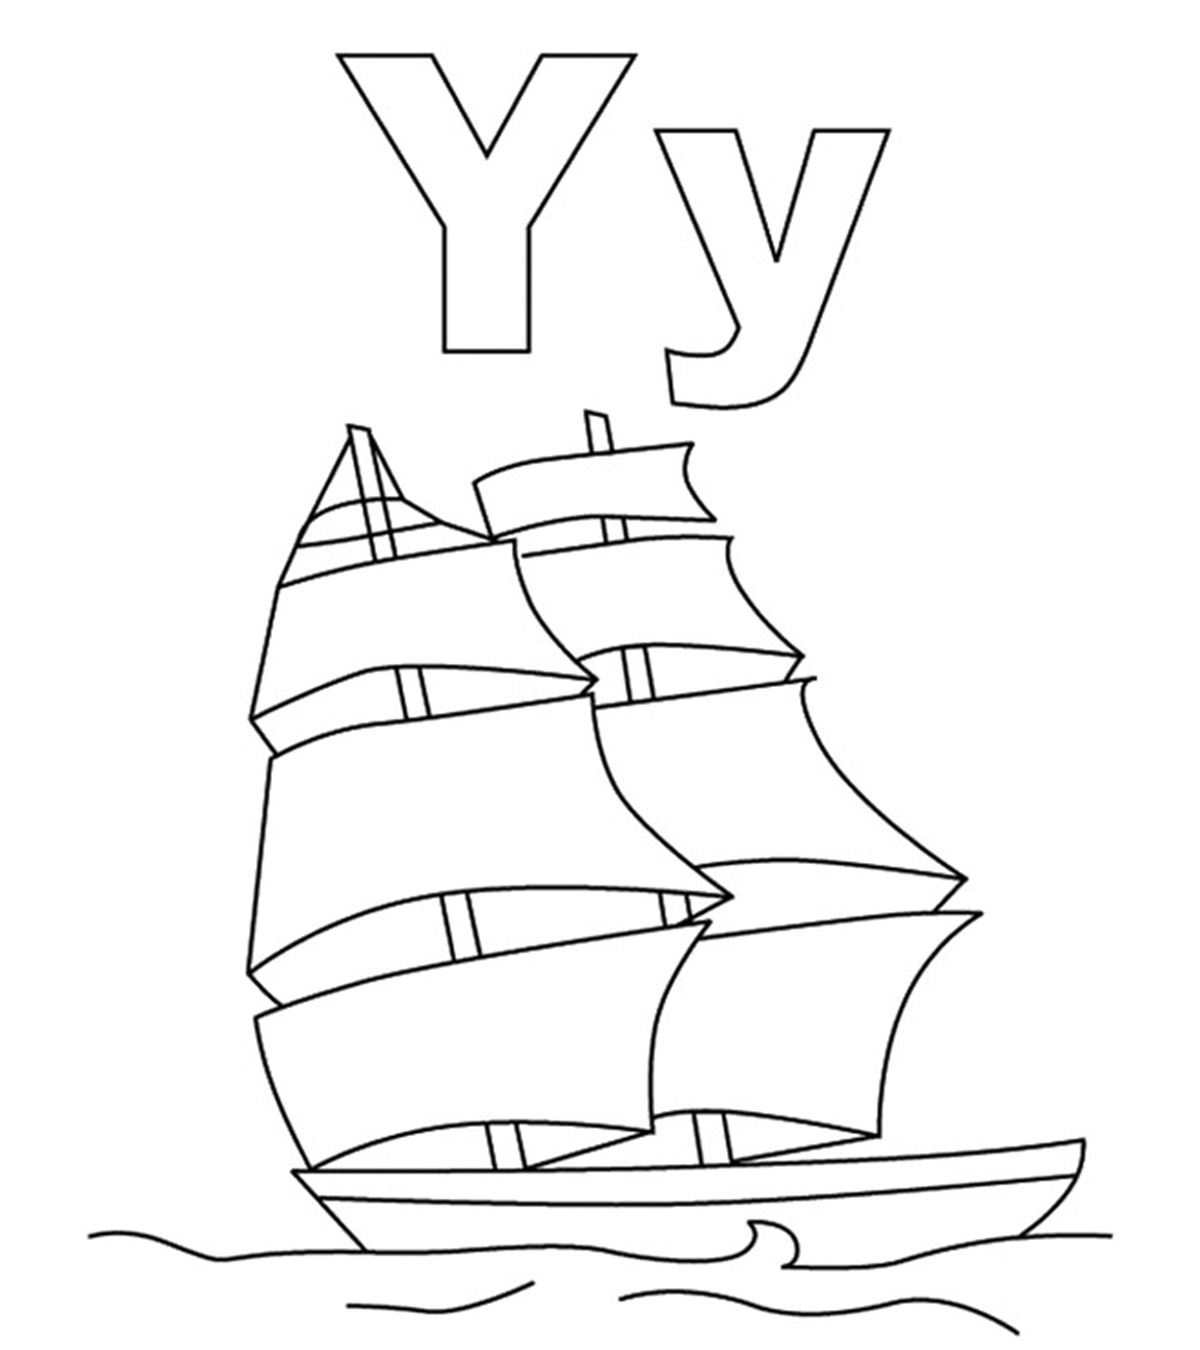 Top 10 Letter ‘Y’ Coloring Pages Your Toddler Will Love To Learn & Color